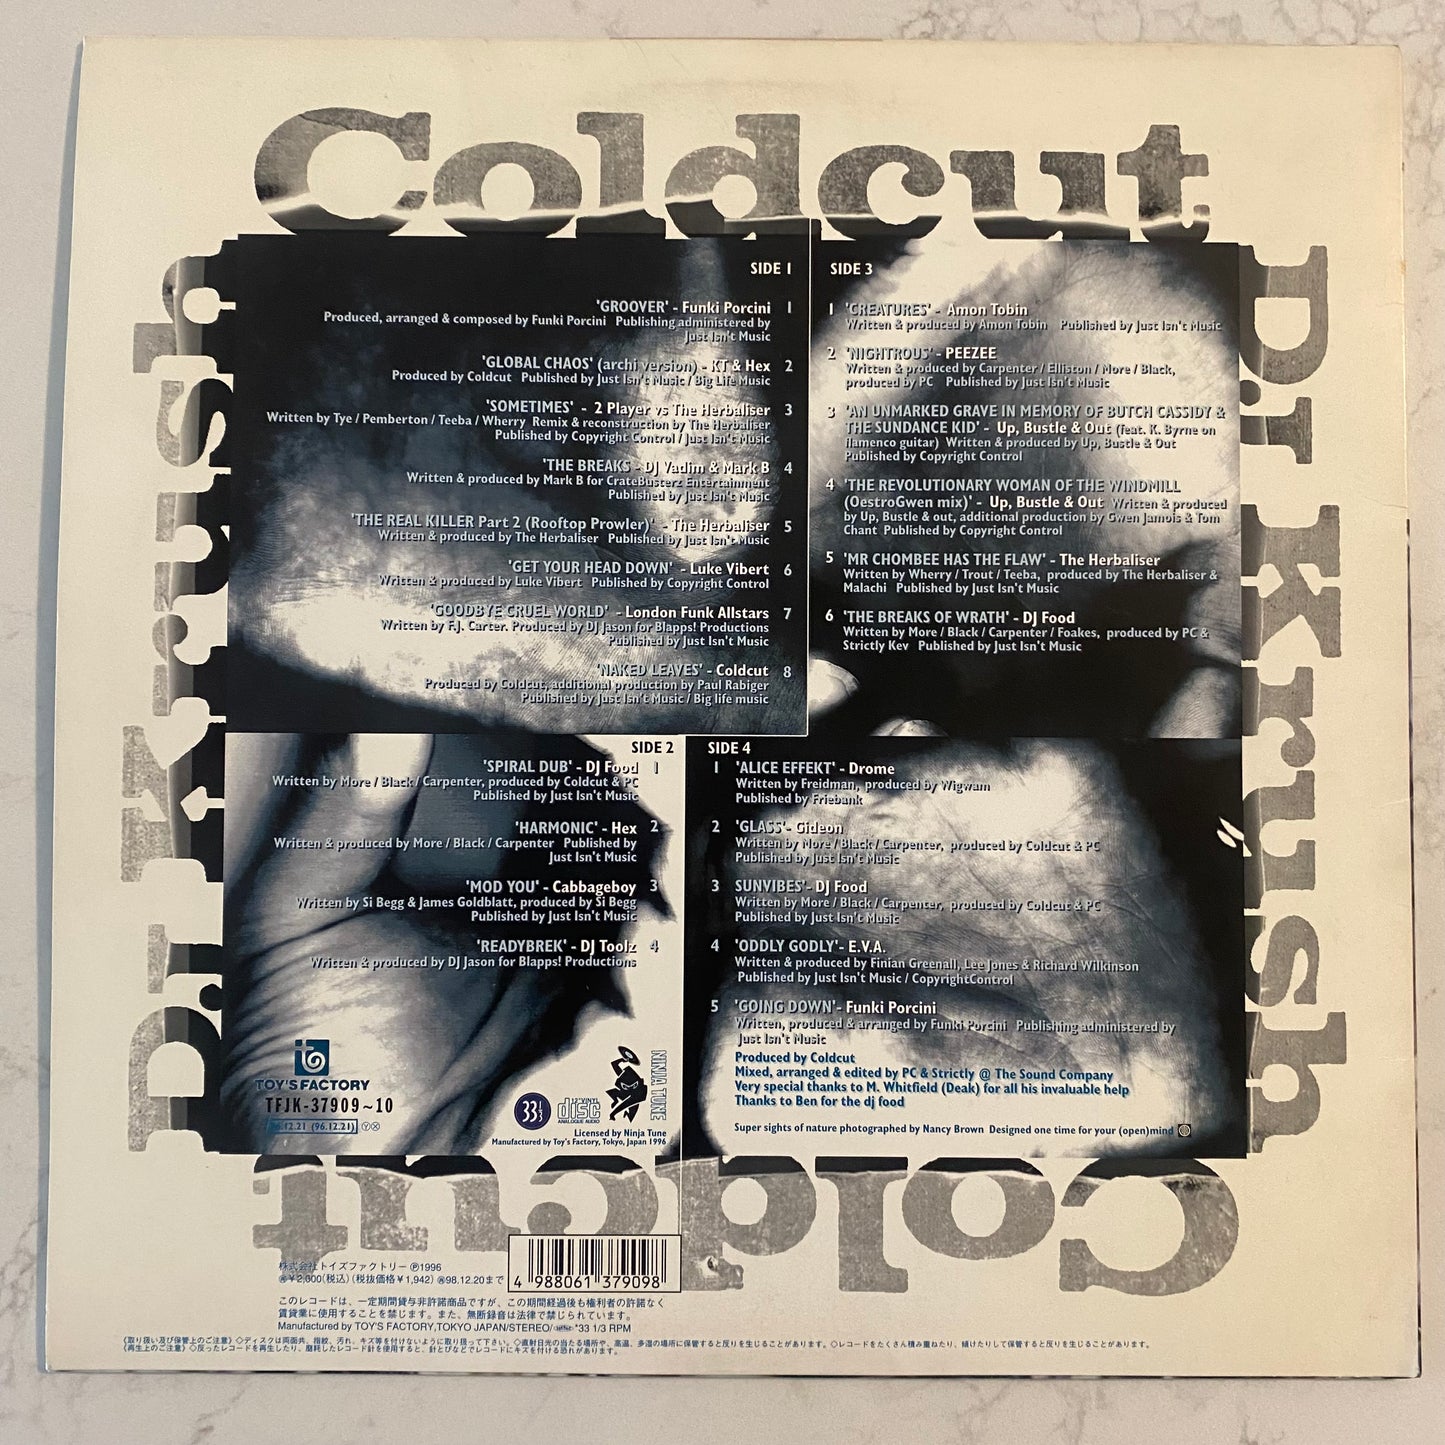 DJ Krush - Cold Krush Cuts 2 (Back In The Base Megamix) (A 60 Minute Remix Of Ninja Tunes Back & Front Catalogue) (2xLP, Mixed)